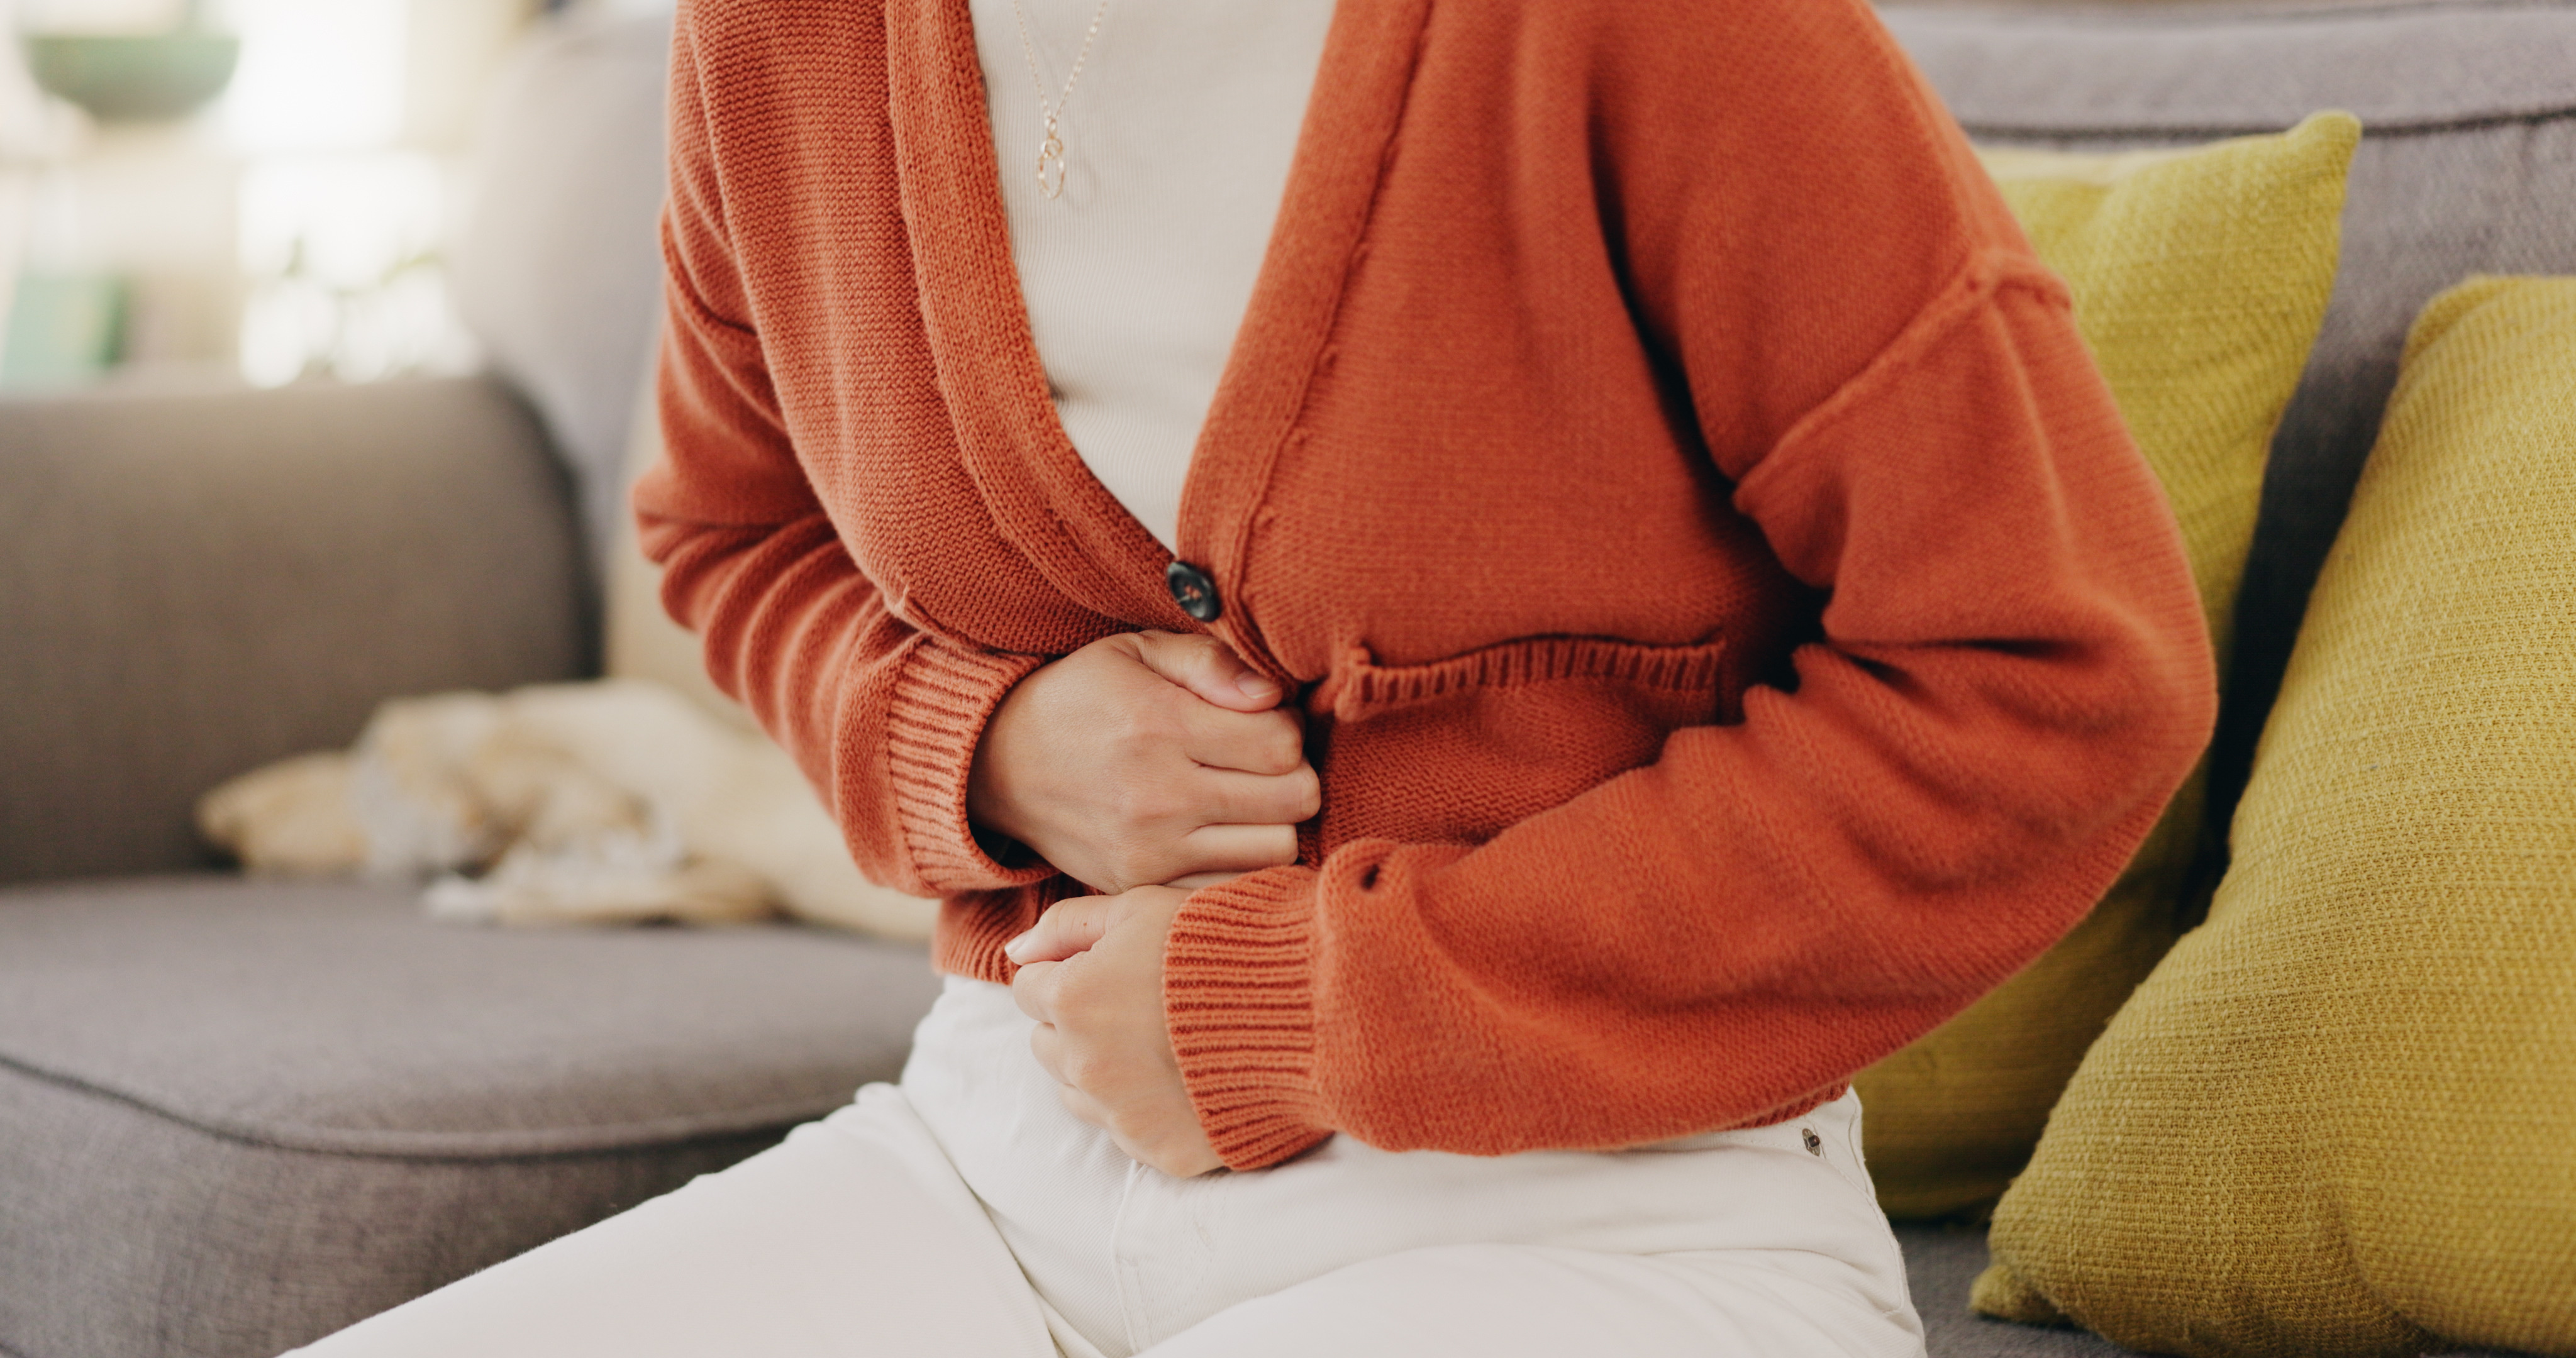 Ursachen für Blähbauch_Stomach ache, cramps and hands of woman with abdomen pain due to constipation, menstruation or ibs issue. Sick, home and person suffering and holding belly in a house lounge, couch and living room.